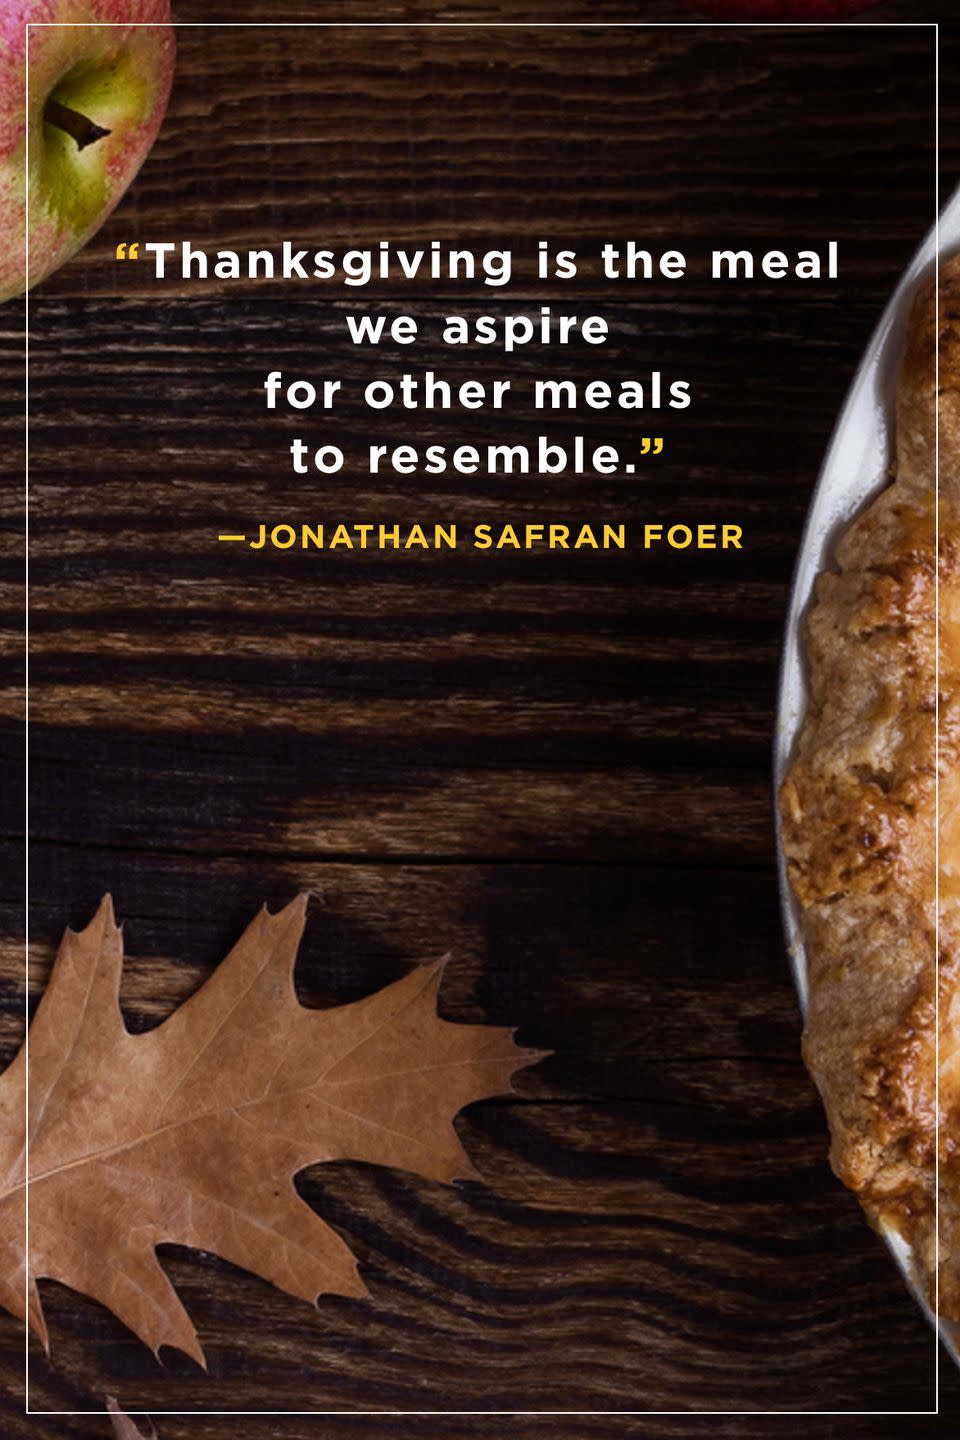 <p>"Thanksgiving is the meal we aspire for other meals to resemble."</p>